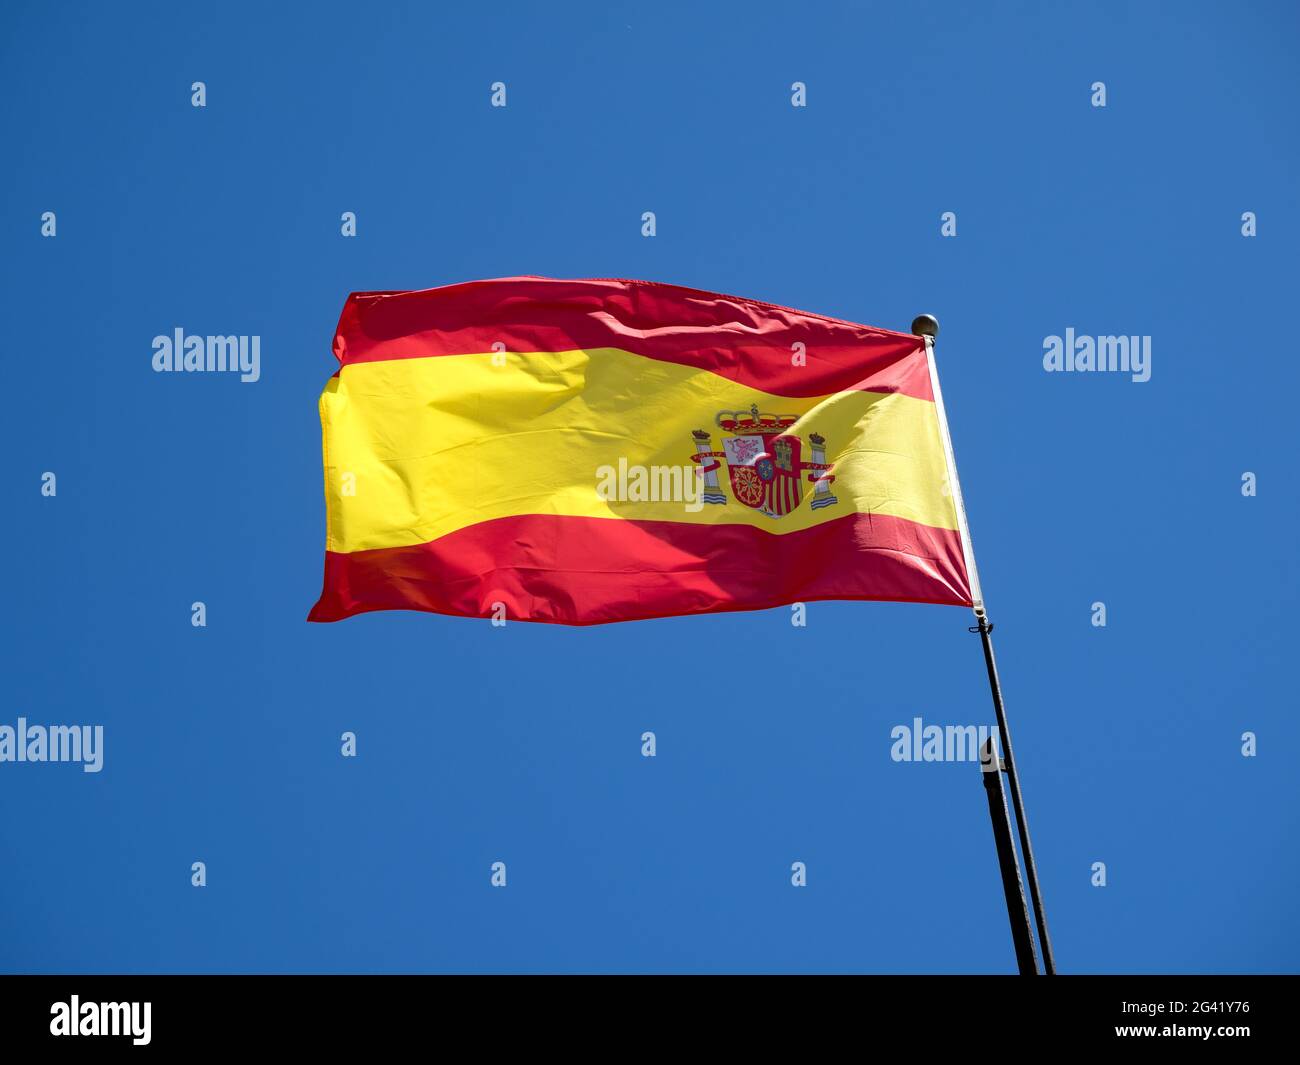 MARBELLA, ANDALUCIA/SPAIN - MAY 4 : Spanish flag flying in Marbella Spain on May 4, 2014 Stock Photo